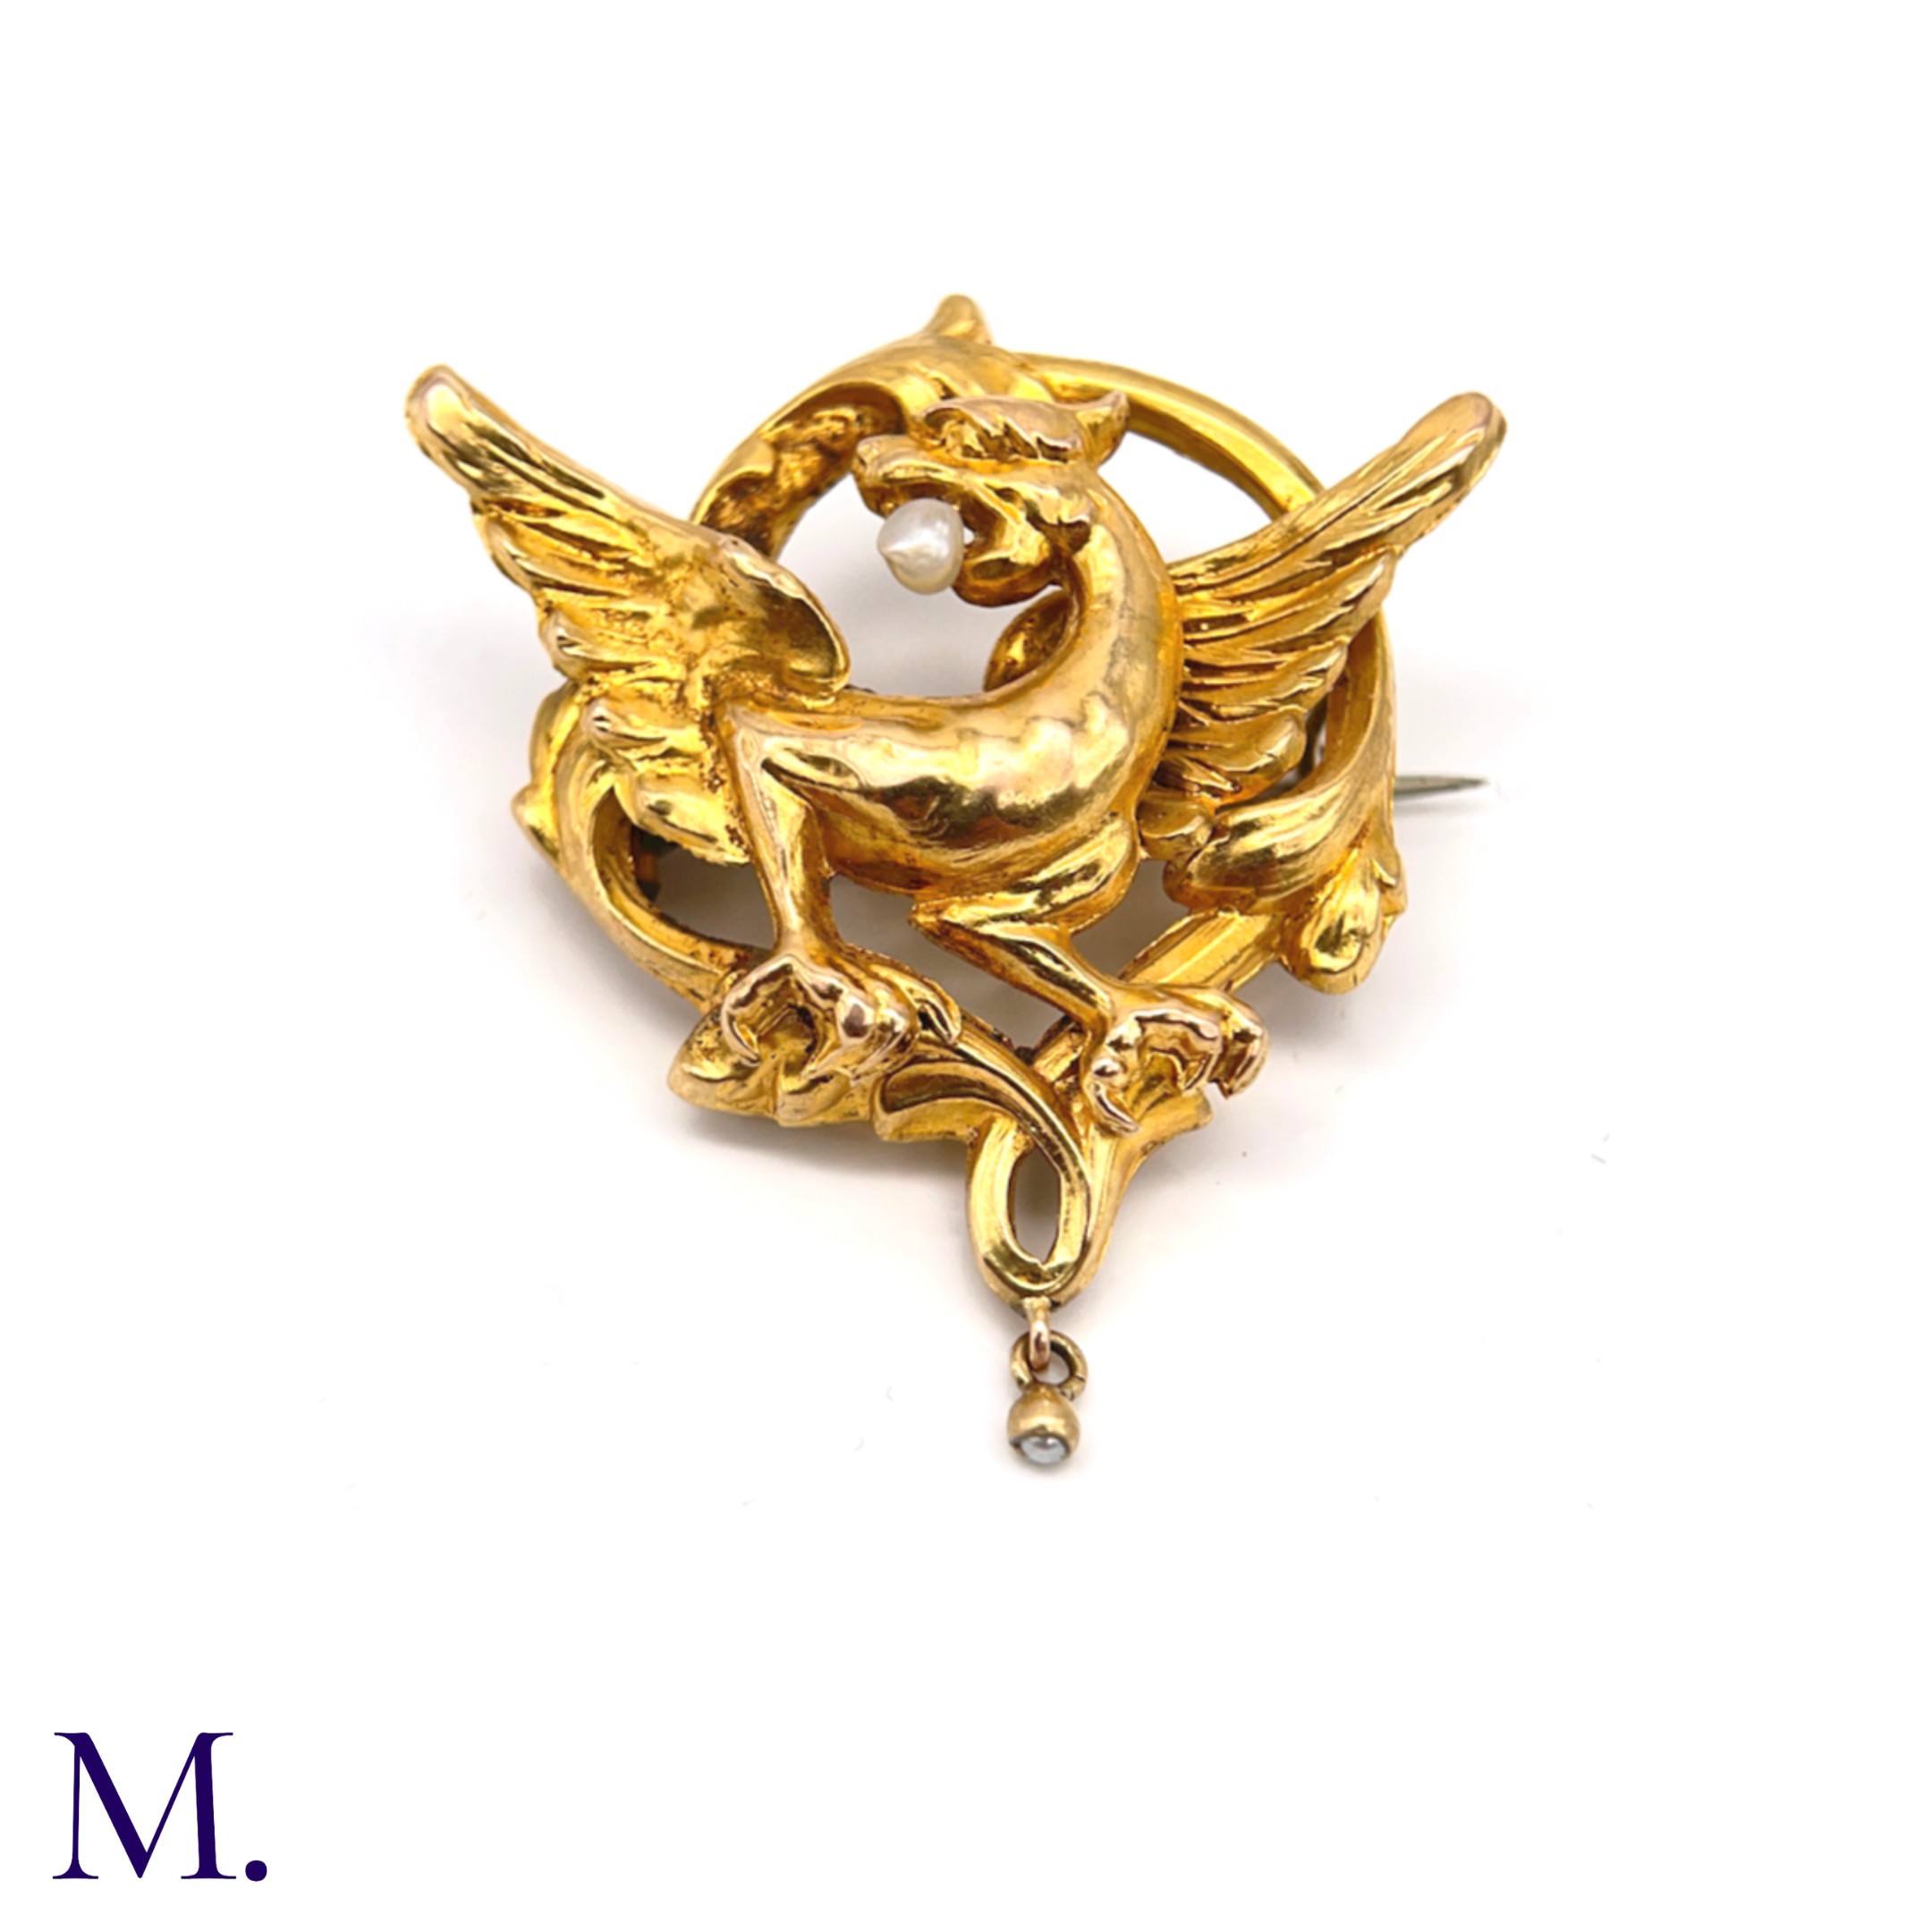 Antique French Chimera Brooch with Pearls